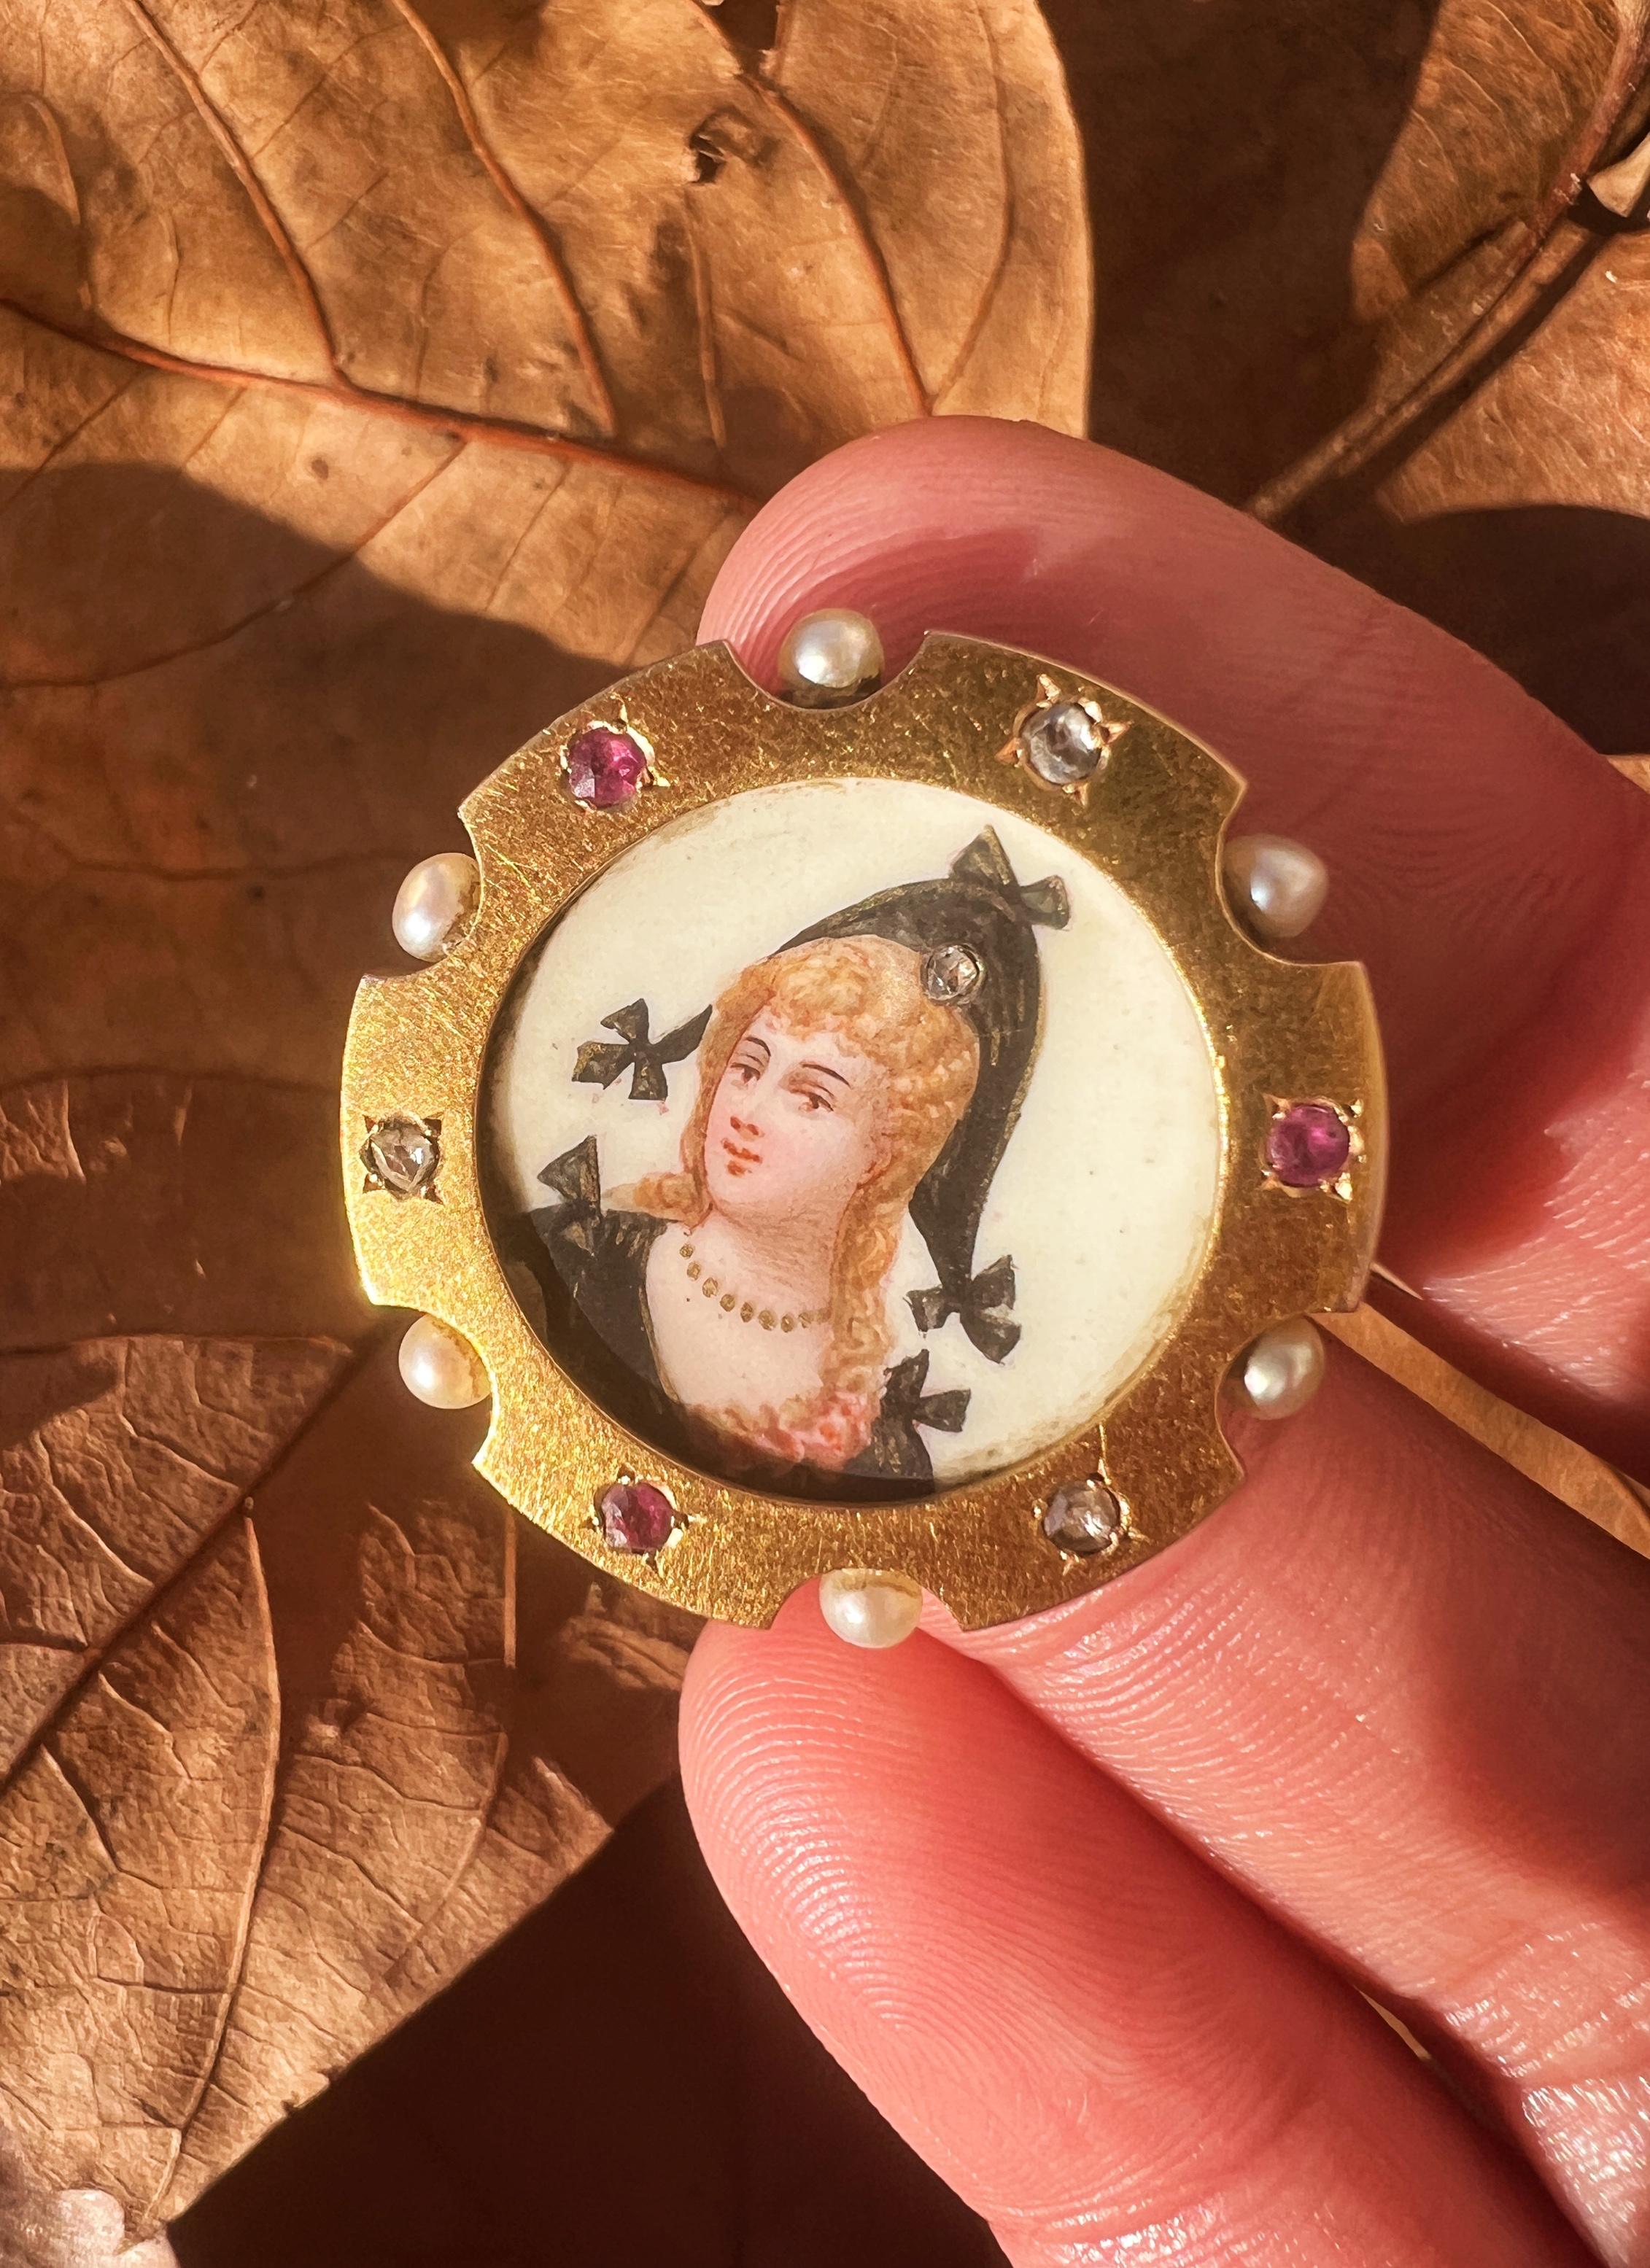 Rose Cut Victorian Era 18K Gold Miniature Portrait Brooch with Rubies Diamonds and Pearls